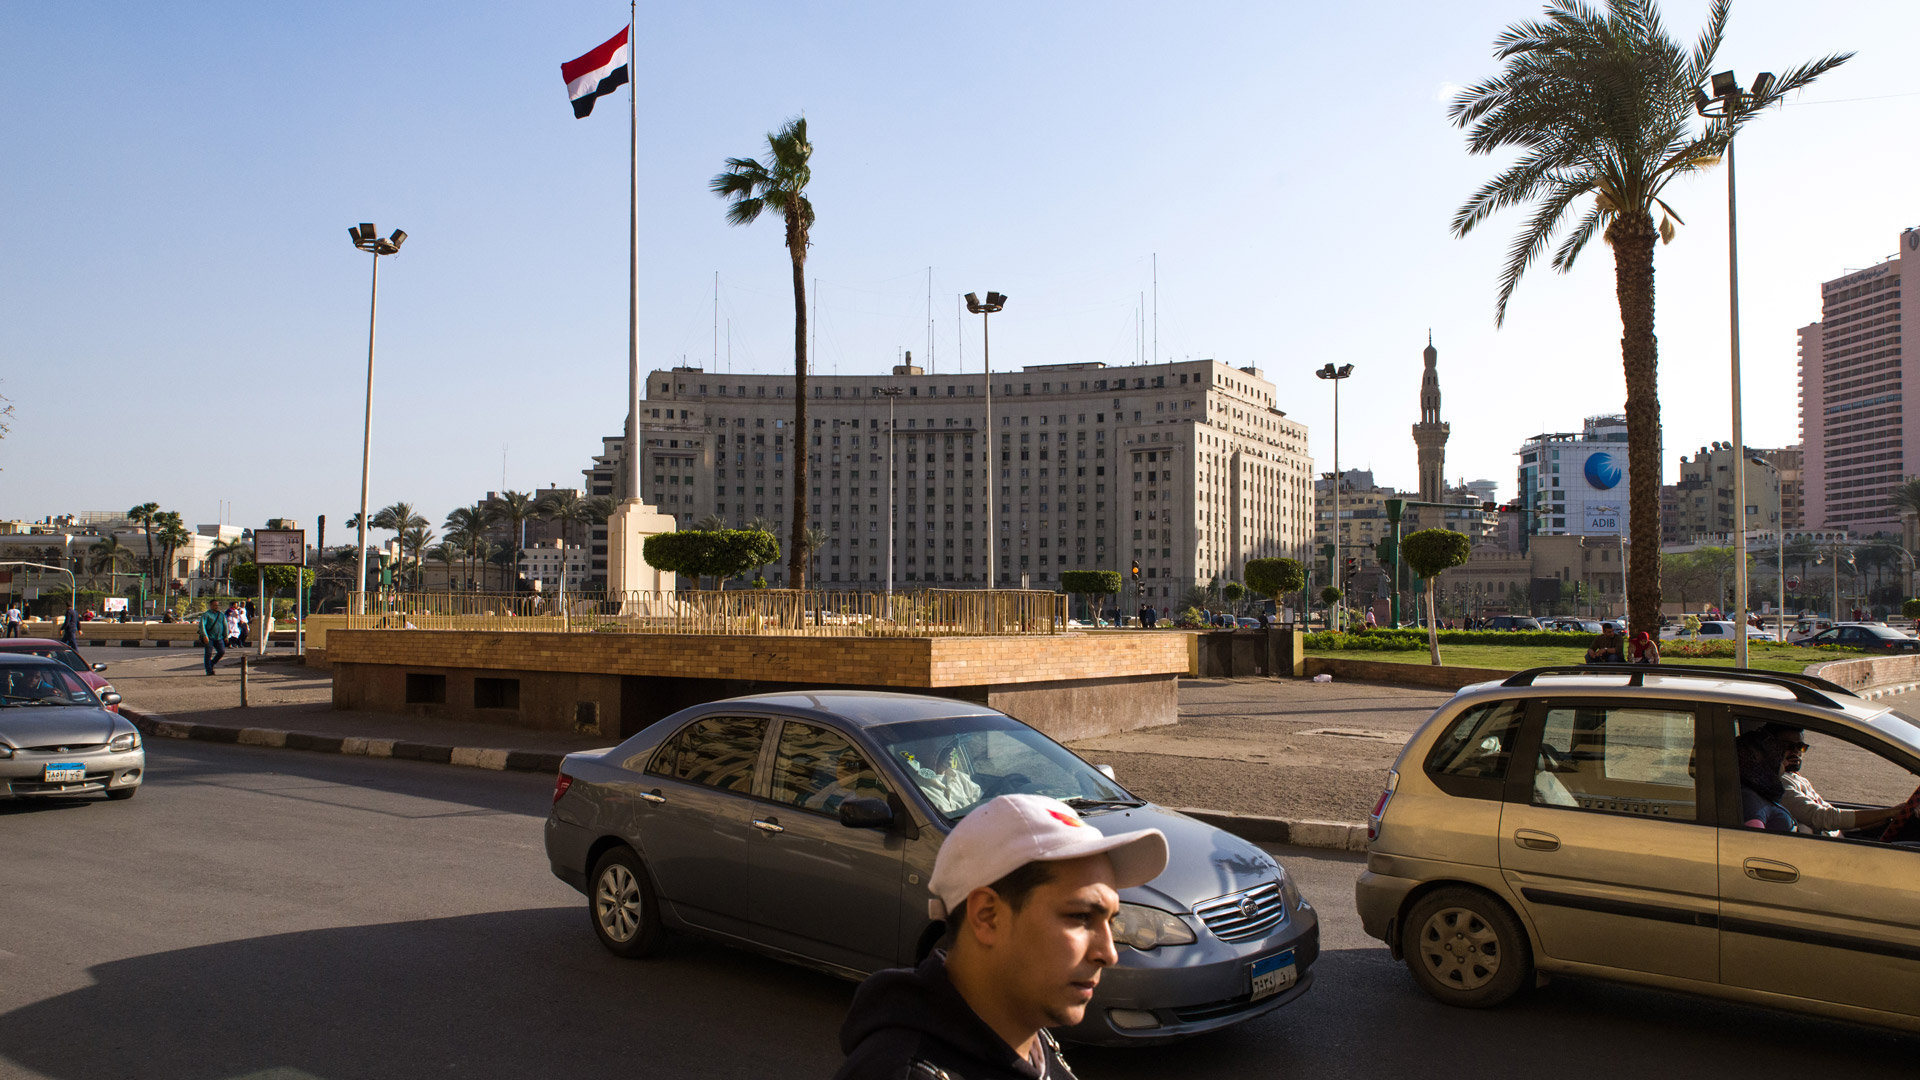 Tahrir Square in Cairo. Since 2013, Egypt has experienced extremist attacks in its major cities and on the Sinai Peninsula, most recently the 24 November mosque attack that killed more than 300 worshippers. 